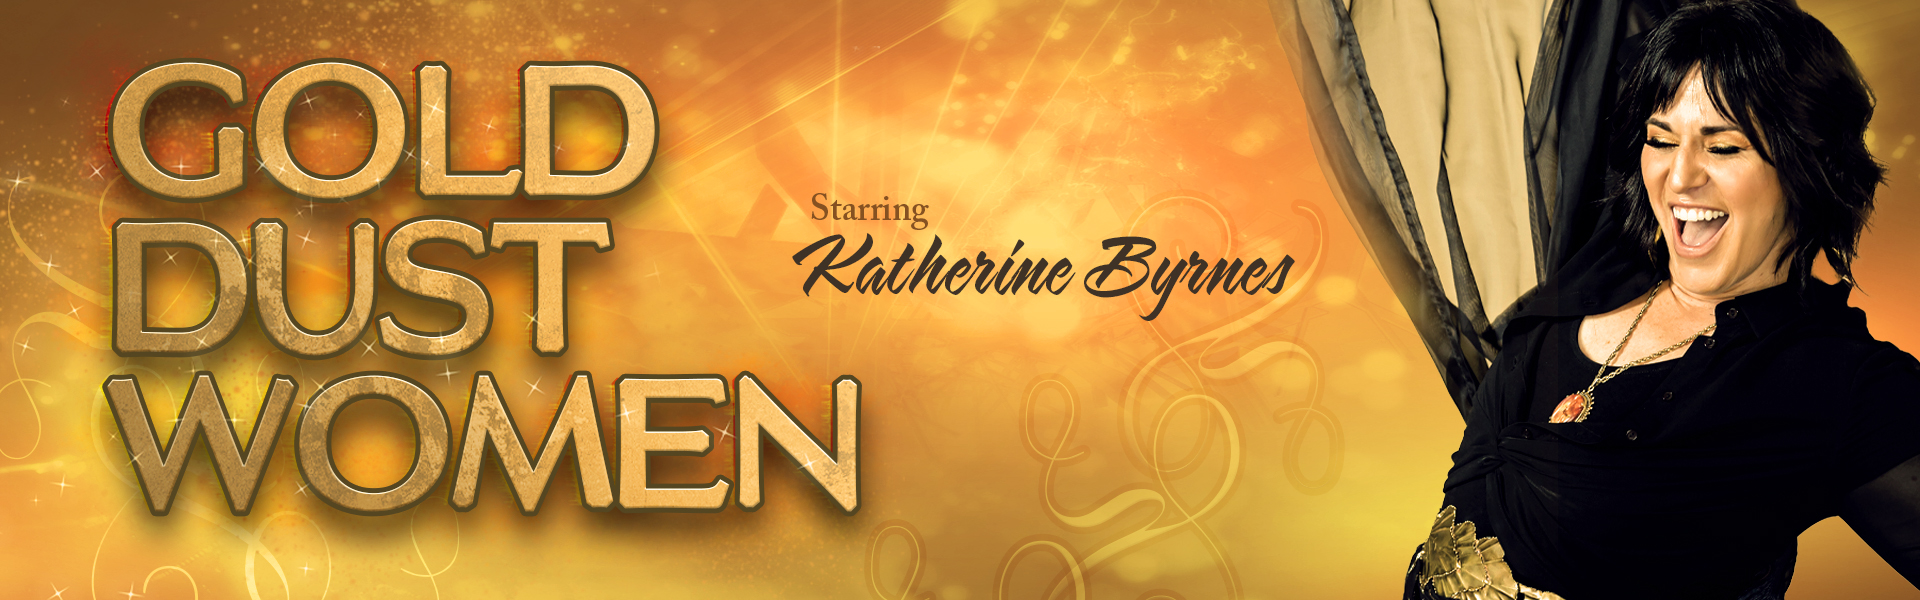 Katherine Byrnes performs in "Gold Dust Women"